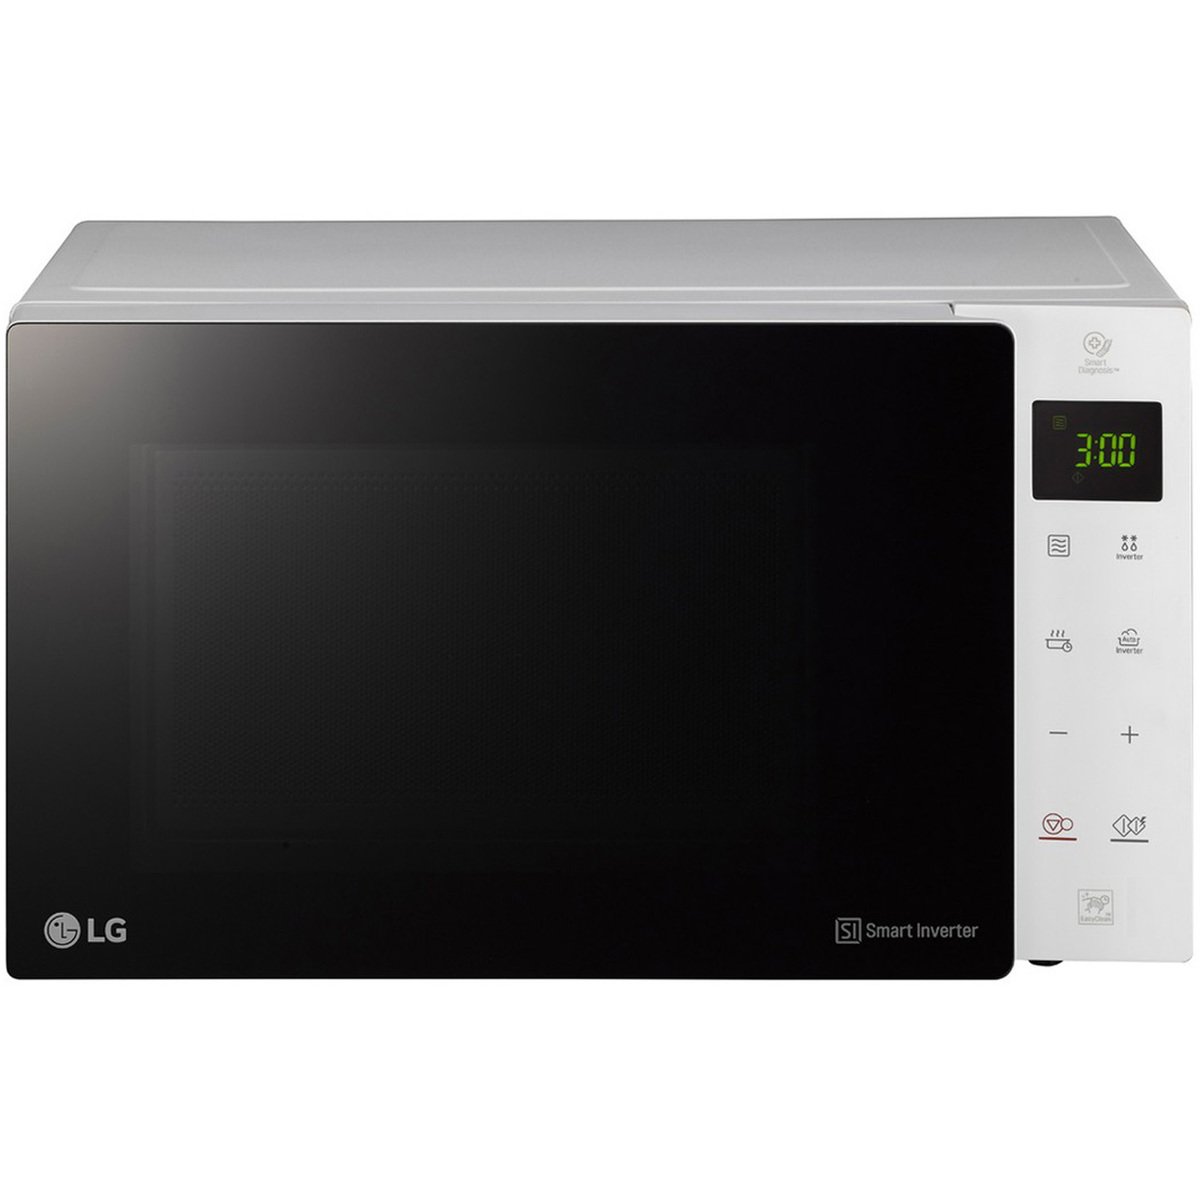 LG Microwave Oven with Grill MH6535GISW 25Ltr